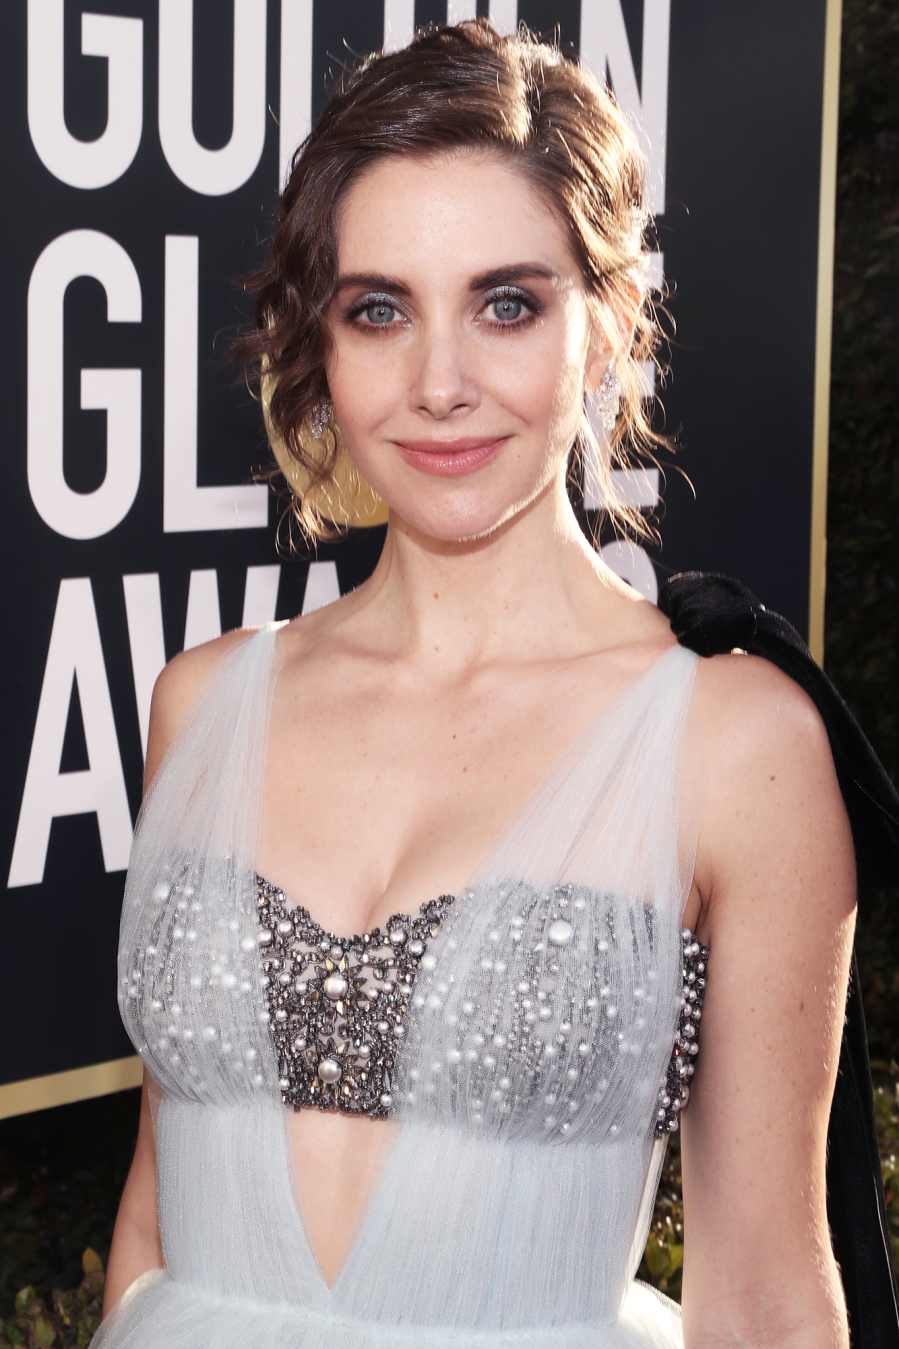 The Hottest Hair and Makeup on the 2019 Golden Globe Awards Red Carpet